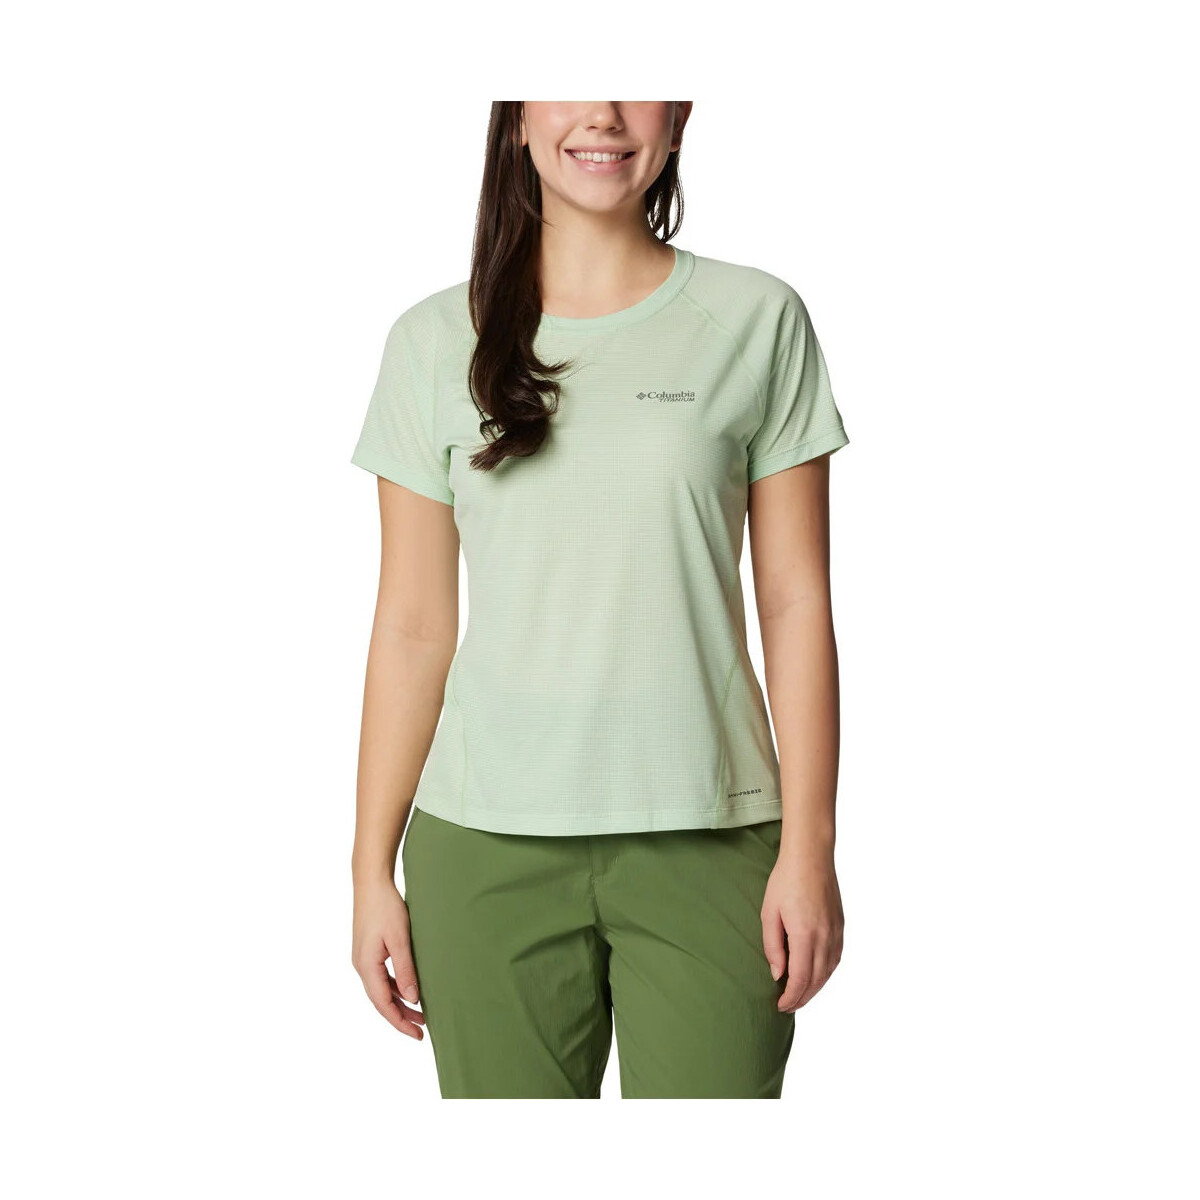 textil Mujer Camisas Columbia Cirque River Short Sleeve Crew Verde